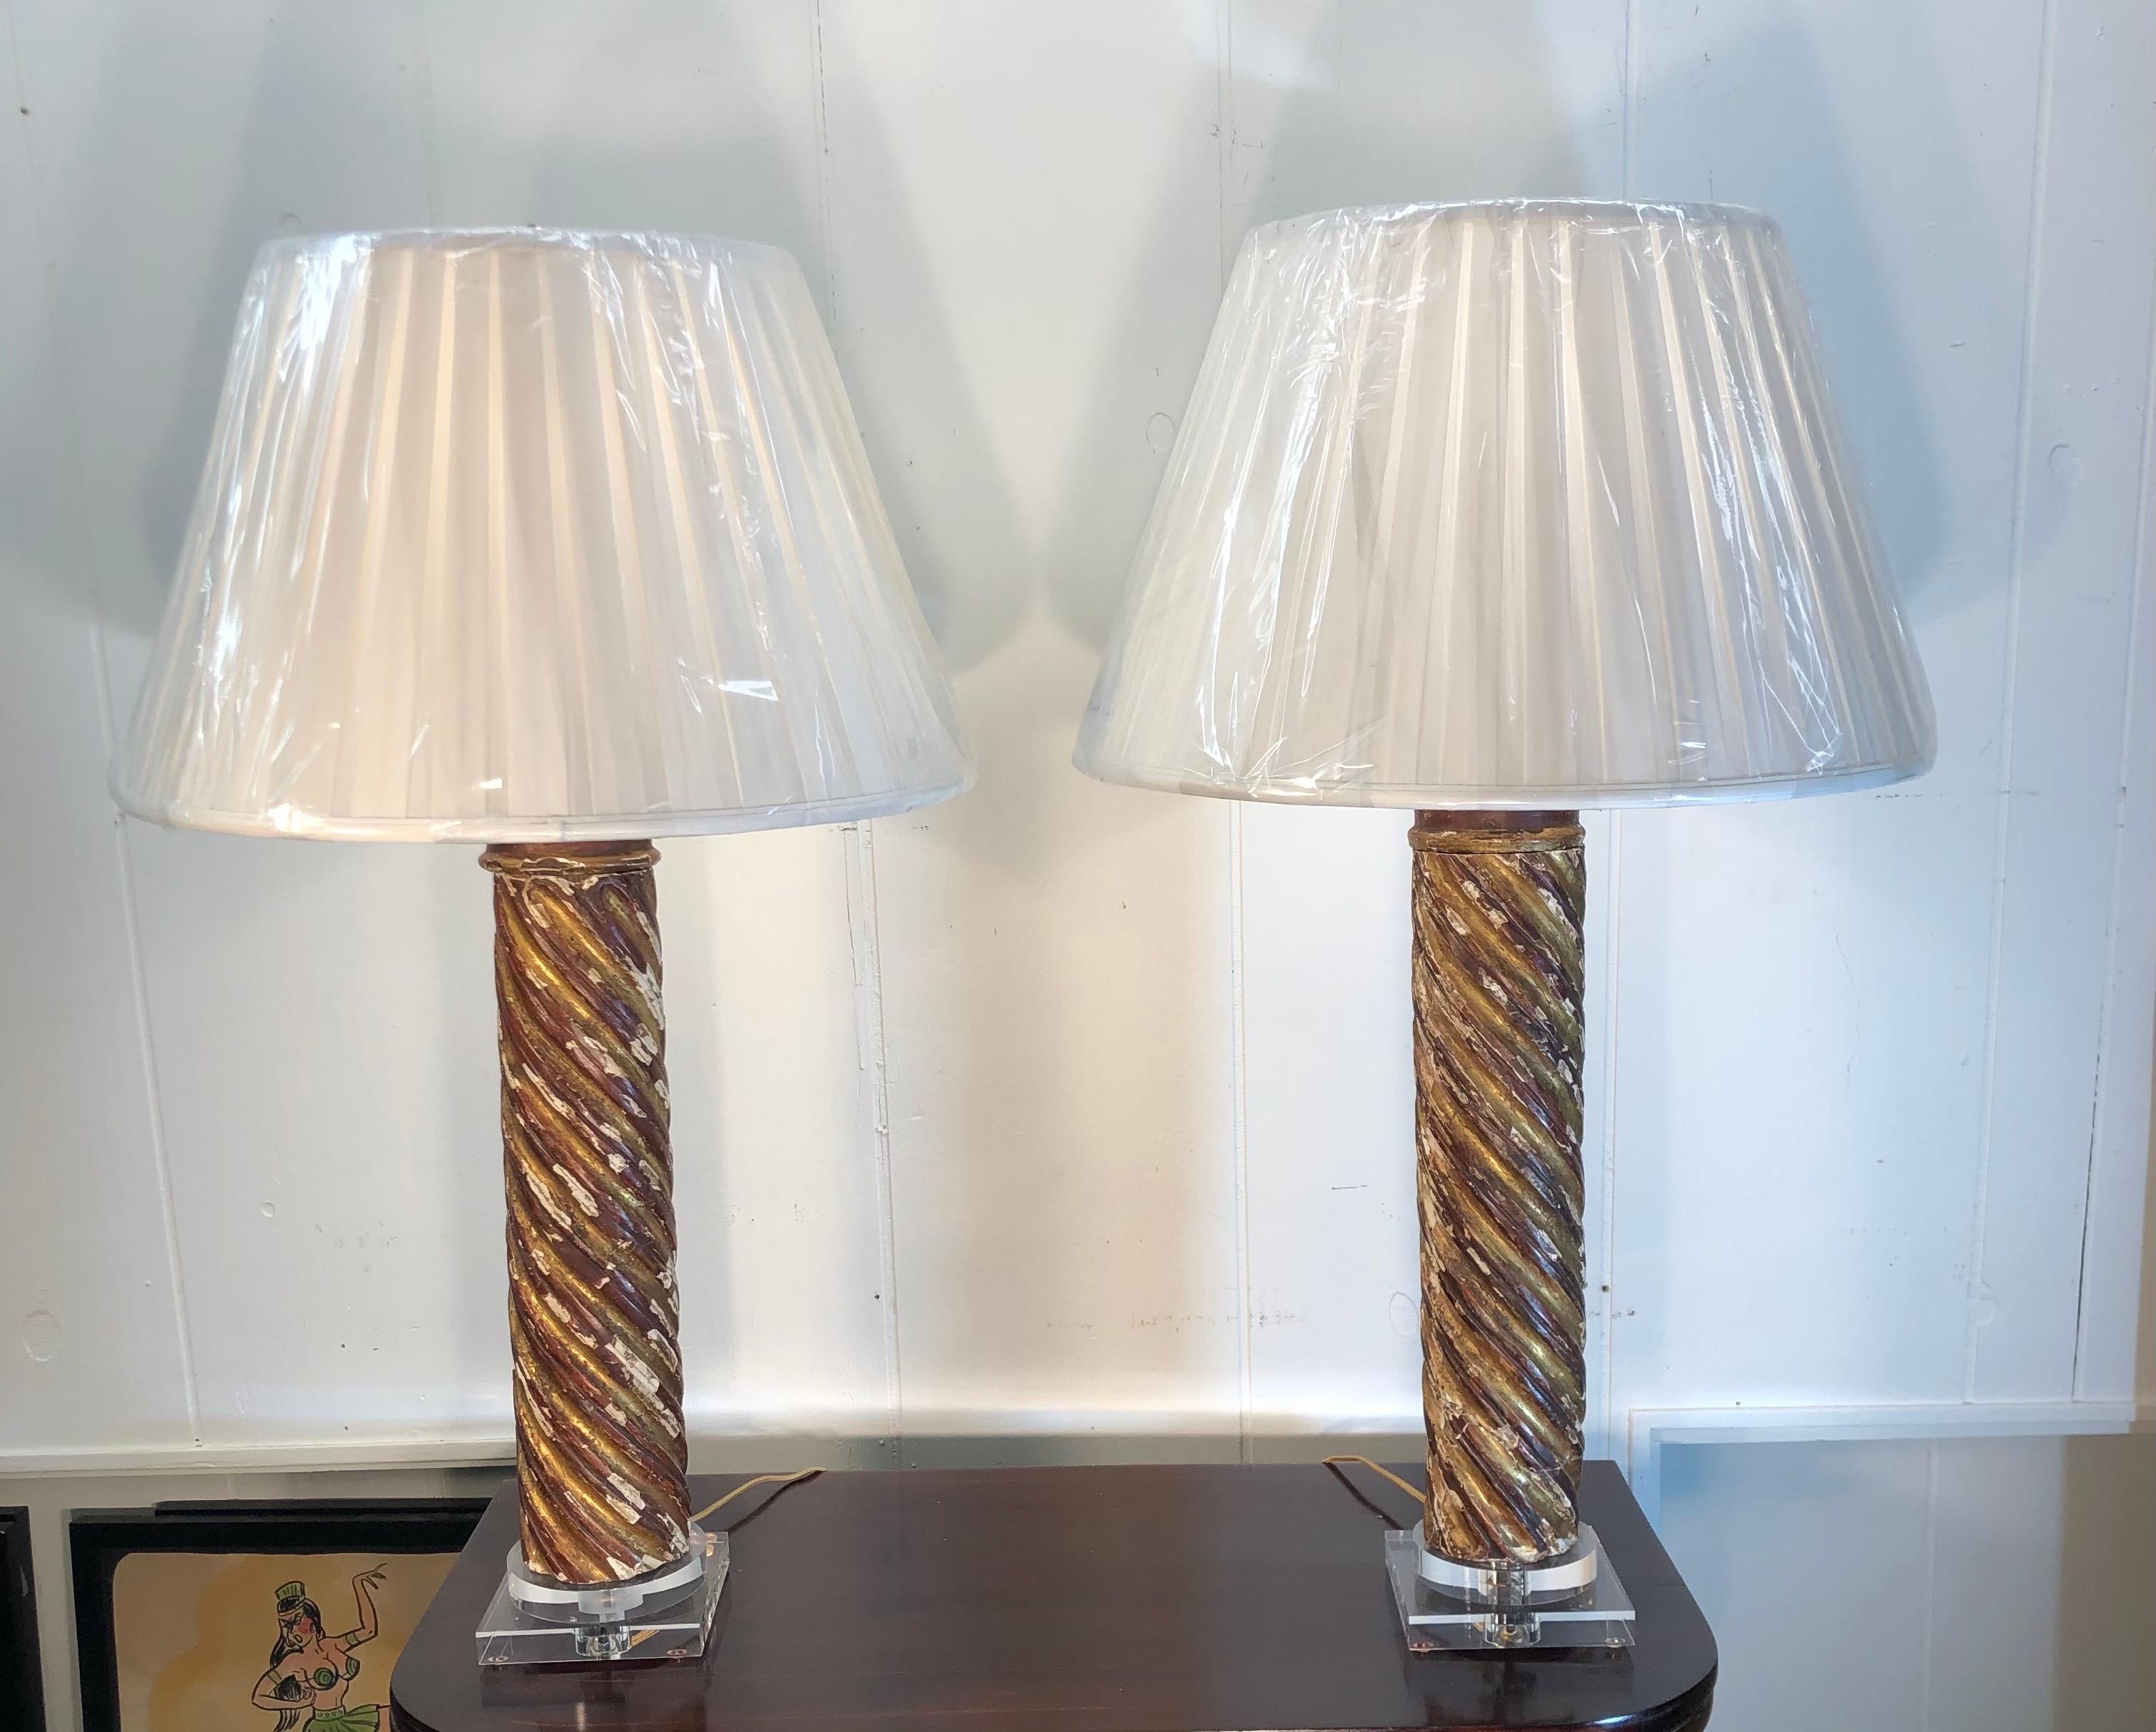 Pair of mid-18th century Italian giltwood column lamps on lucite bases. There are a total of four lamps available to be sold in pairs.